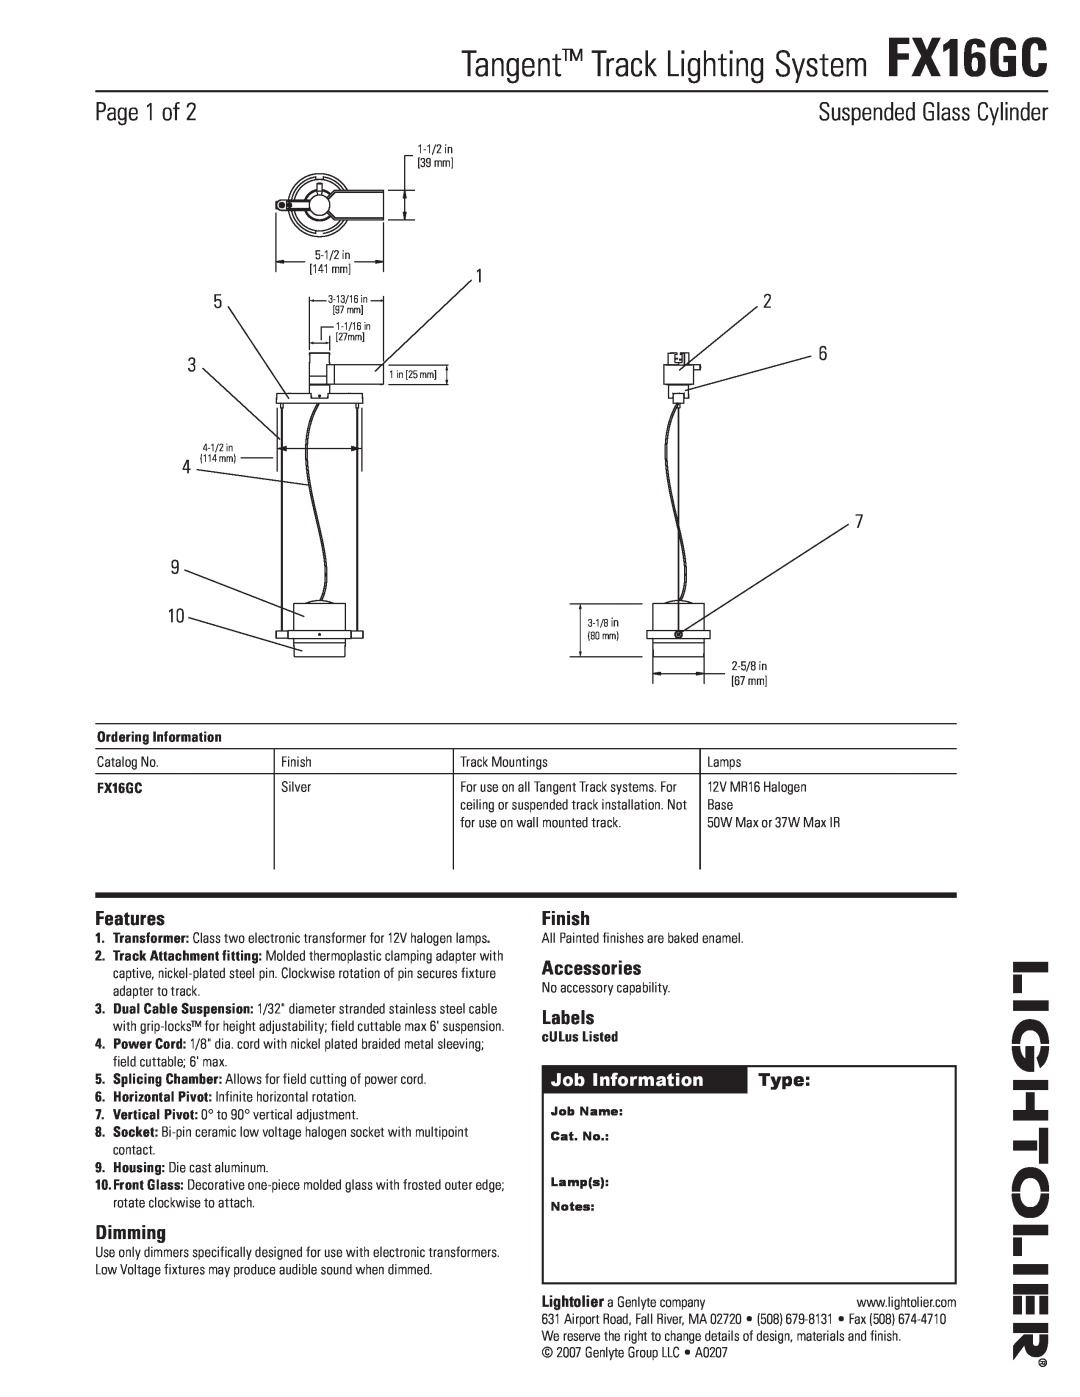 Lightolier manual Tangent Track Lighting System FX16GC, Page of, Suspended Glass Cylinder, Features, Dimming, Finish 